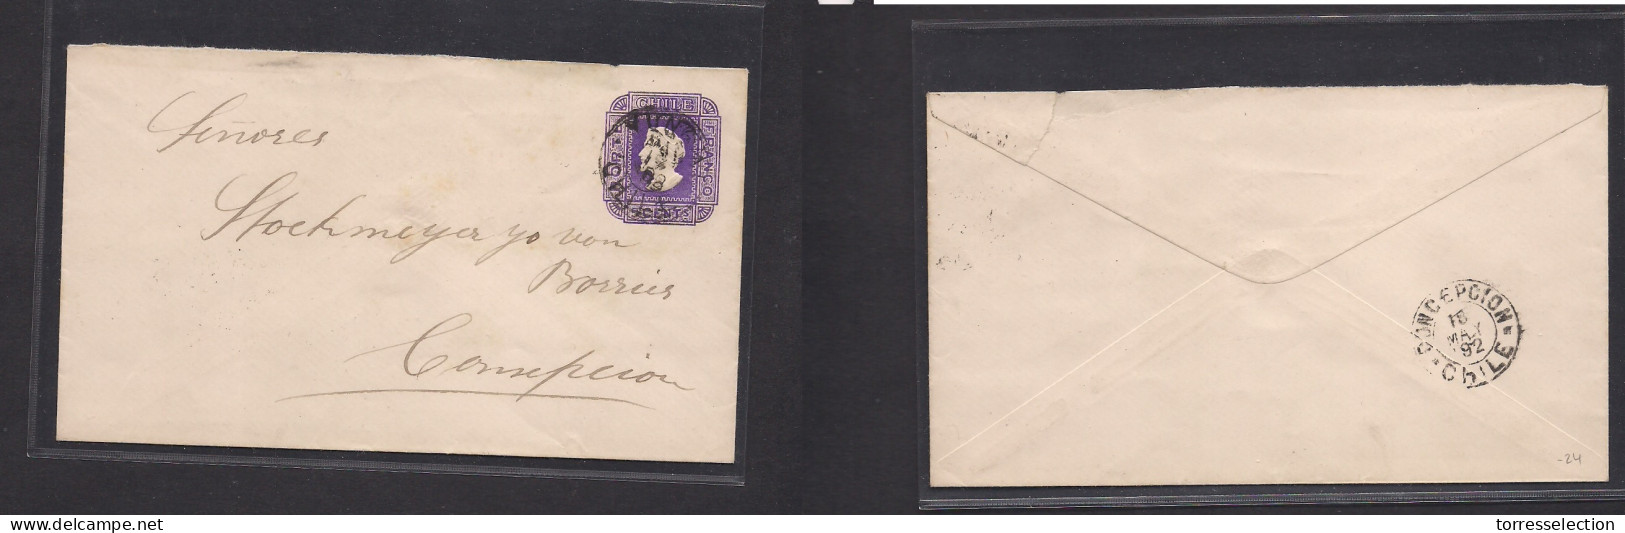 CHILE - Stationery. 1892 (17 May) Yungat - Concepcion. 5c Lilac Stationary Small Envelope, Cds. Paper Crossing Wavy Line - Chile